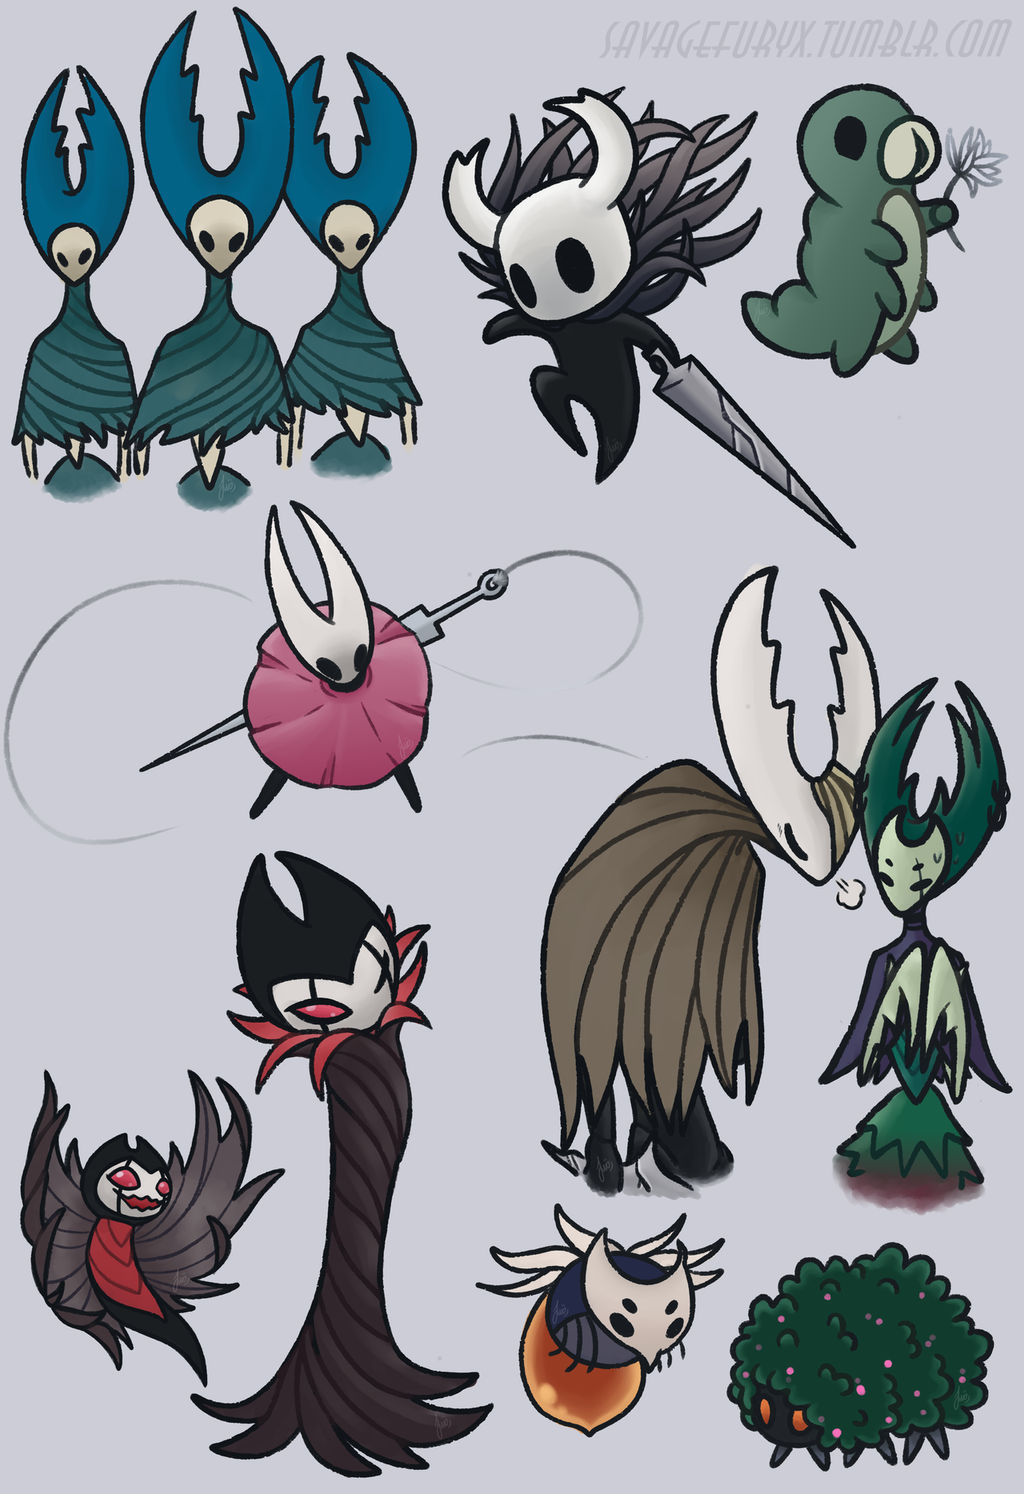 some Hollow Knight characters by savagefuryx on DeviantArt